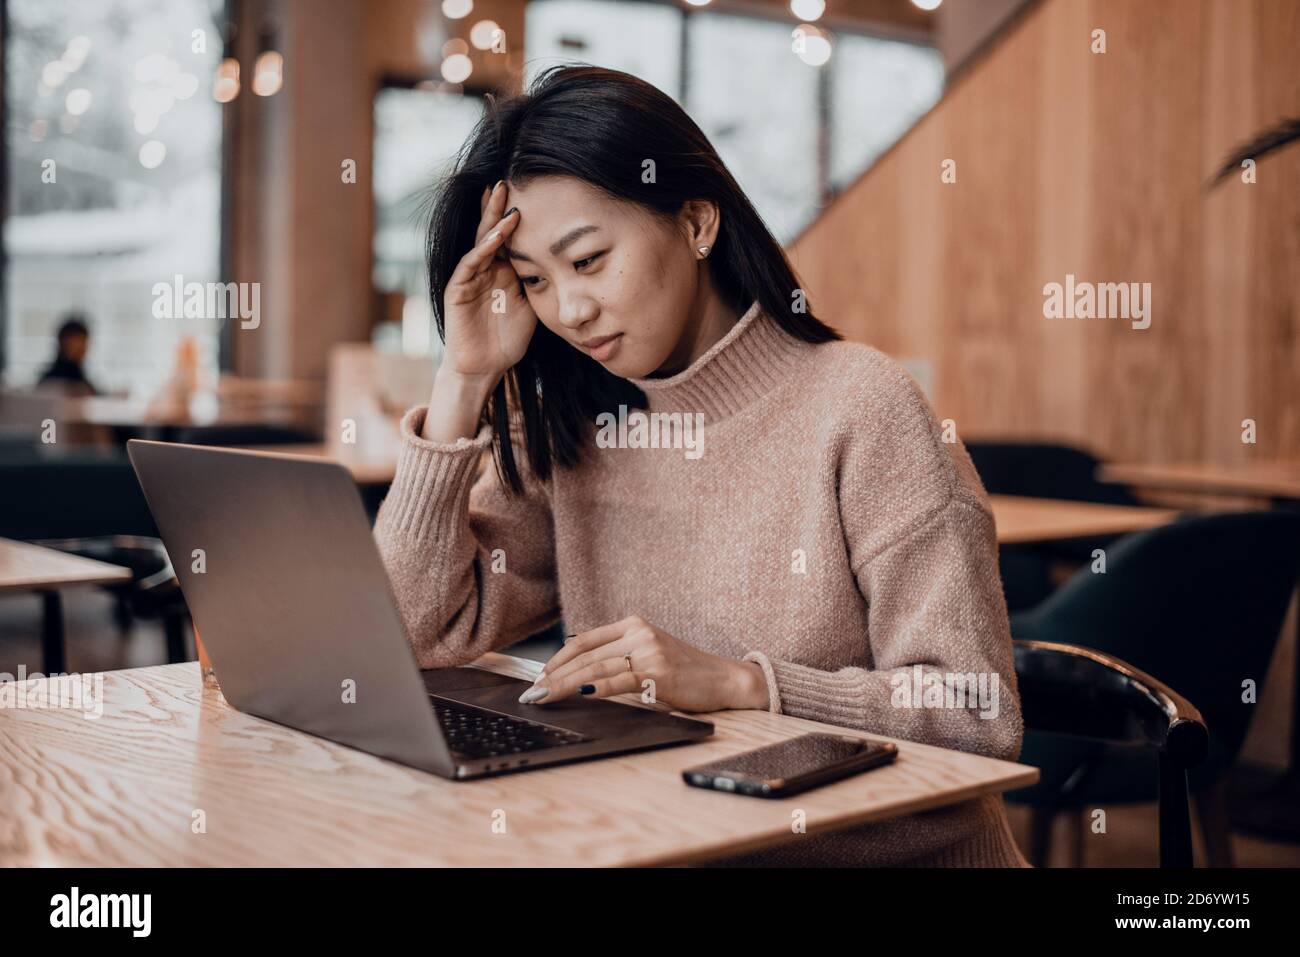 The embarrassed girl works in a laptop in a coffee shop and is unhappy with the mistakes. Confused business woman annoyed by online problem, spam email or fake internet news looking at laptop. female worker feeling shocked about stuck computer, bewildered by scam message or virus. Stock Photo